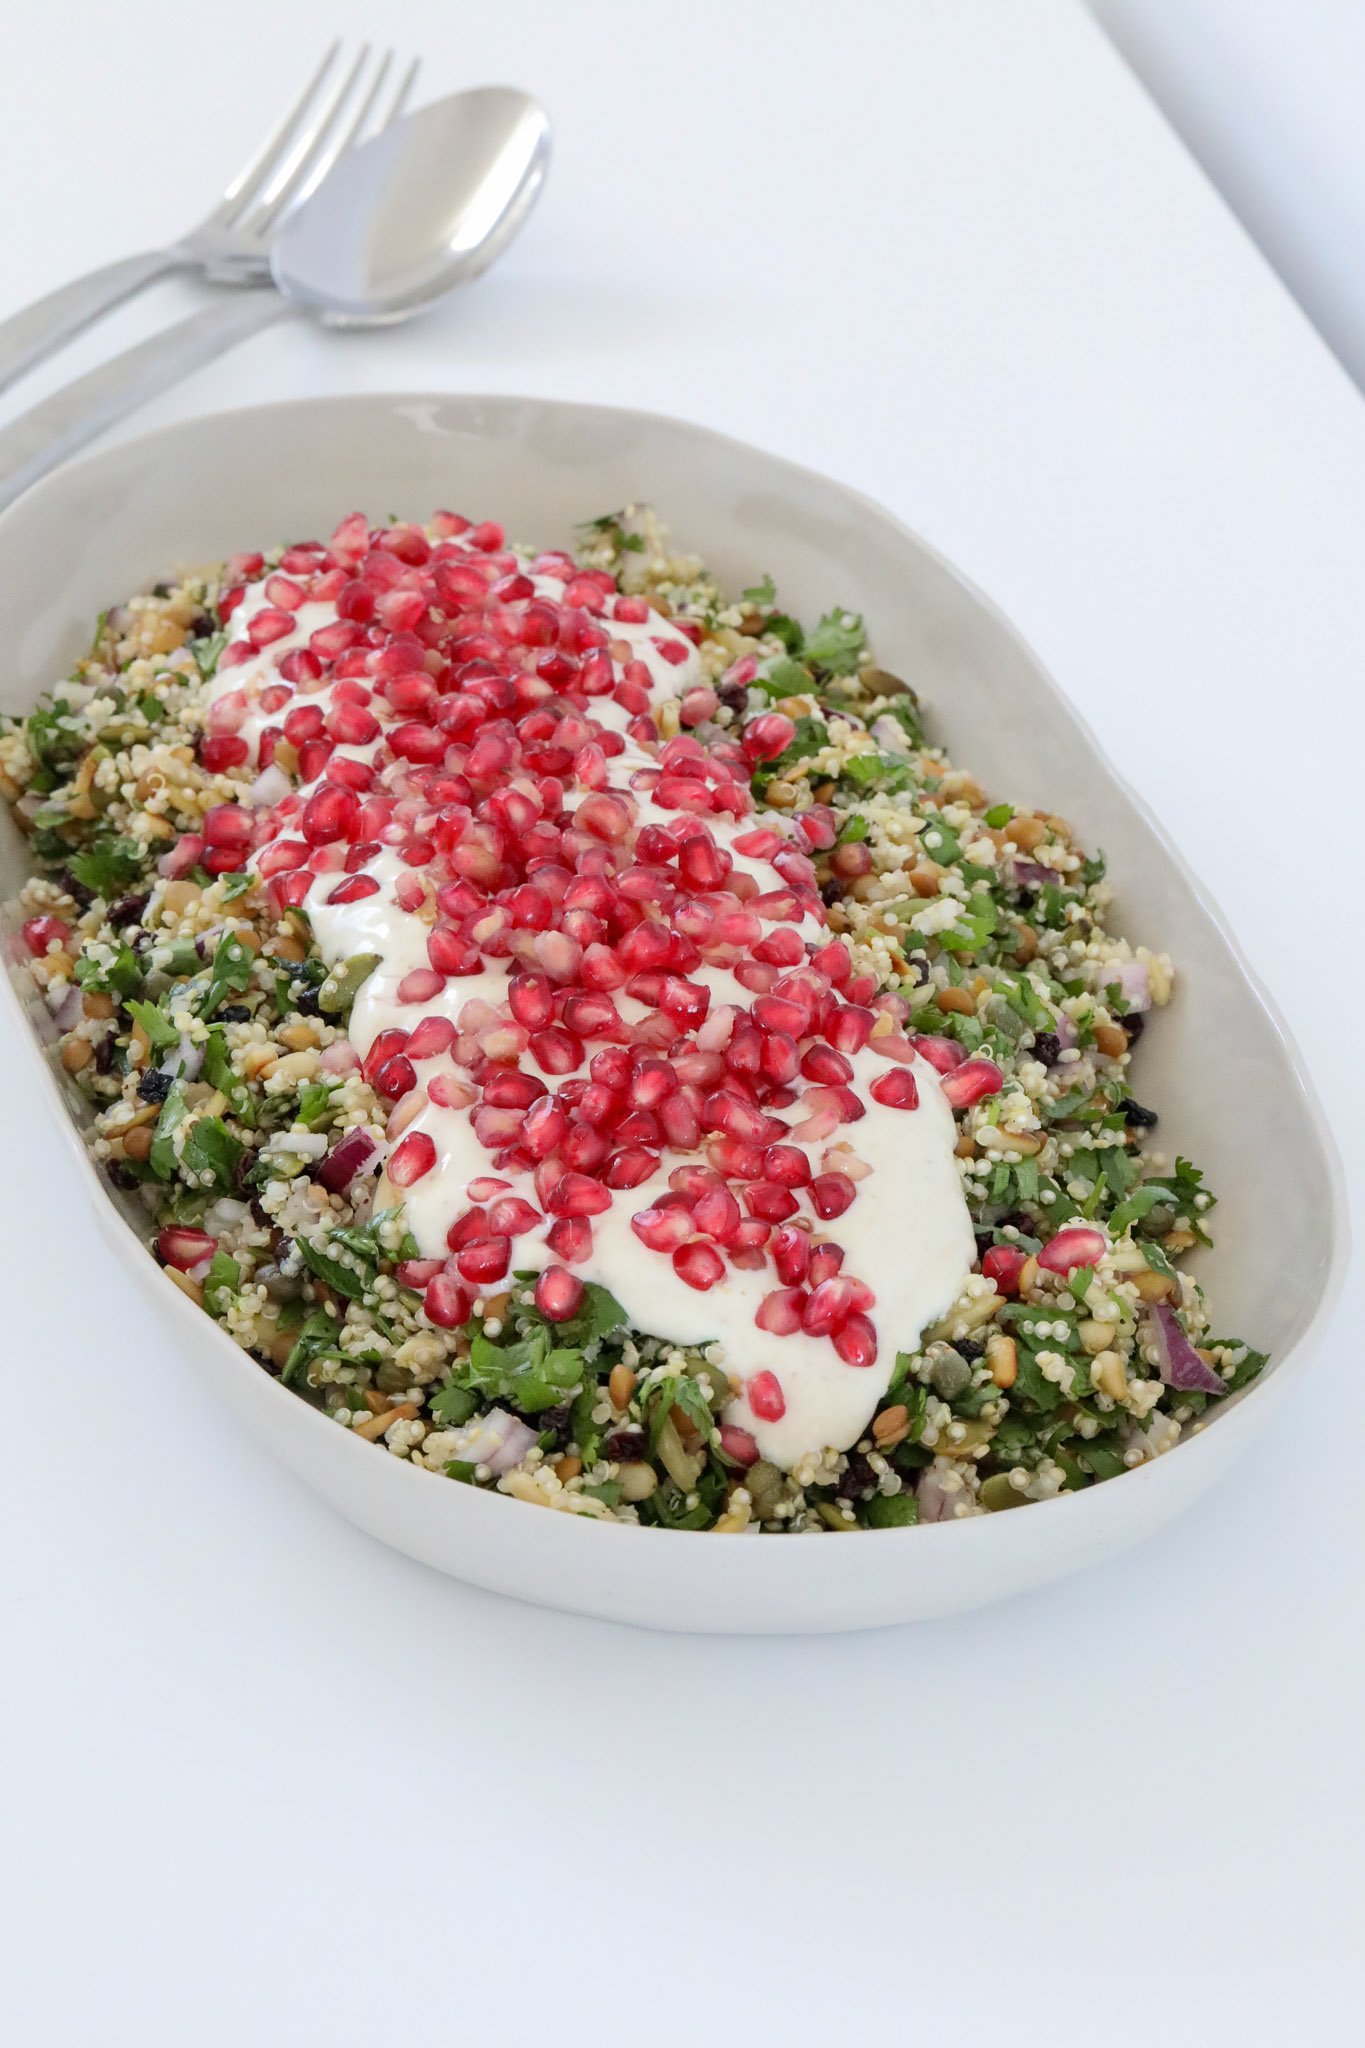 A grain and herbs salad topped with pomegranates and greek yoghurt.